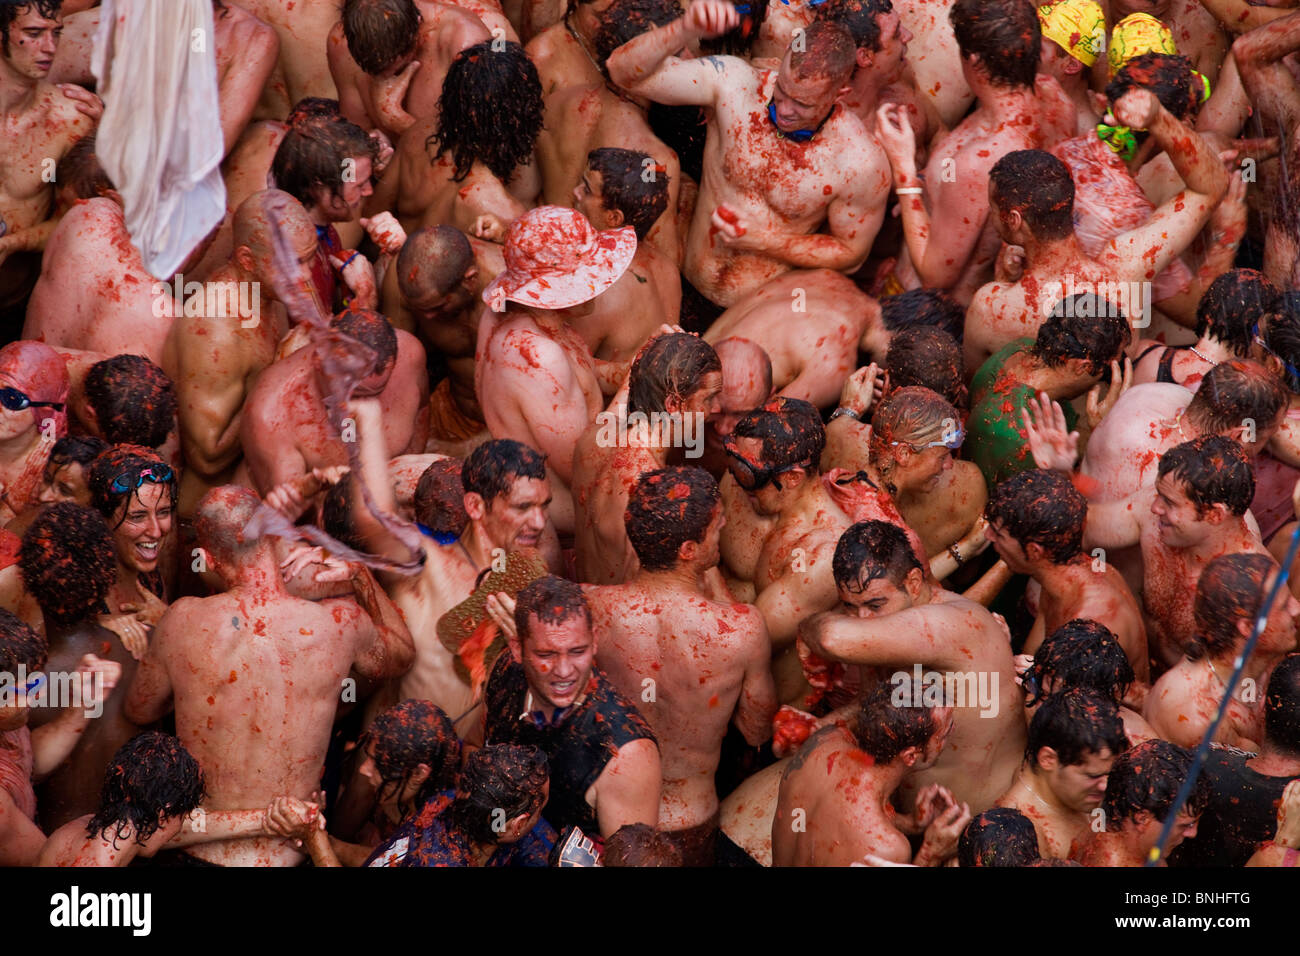 Spain August 2008 Valencia Region Bunol city Tomatina Festival Tomato tomatoes food fight crowds crowd people tourism event fun Stock Photo